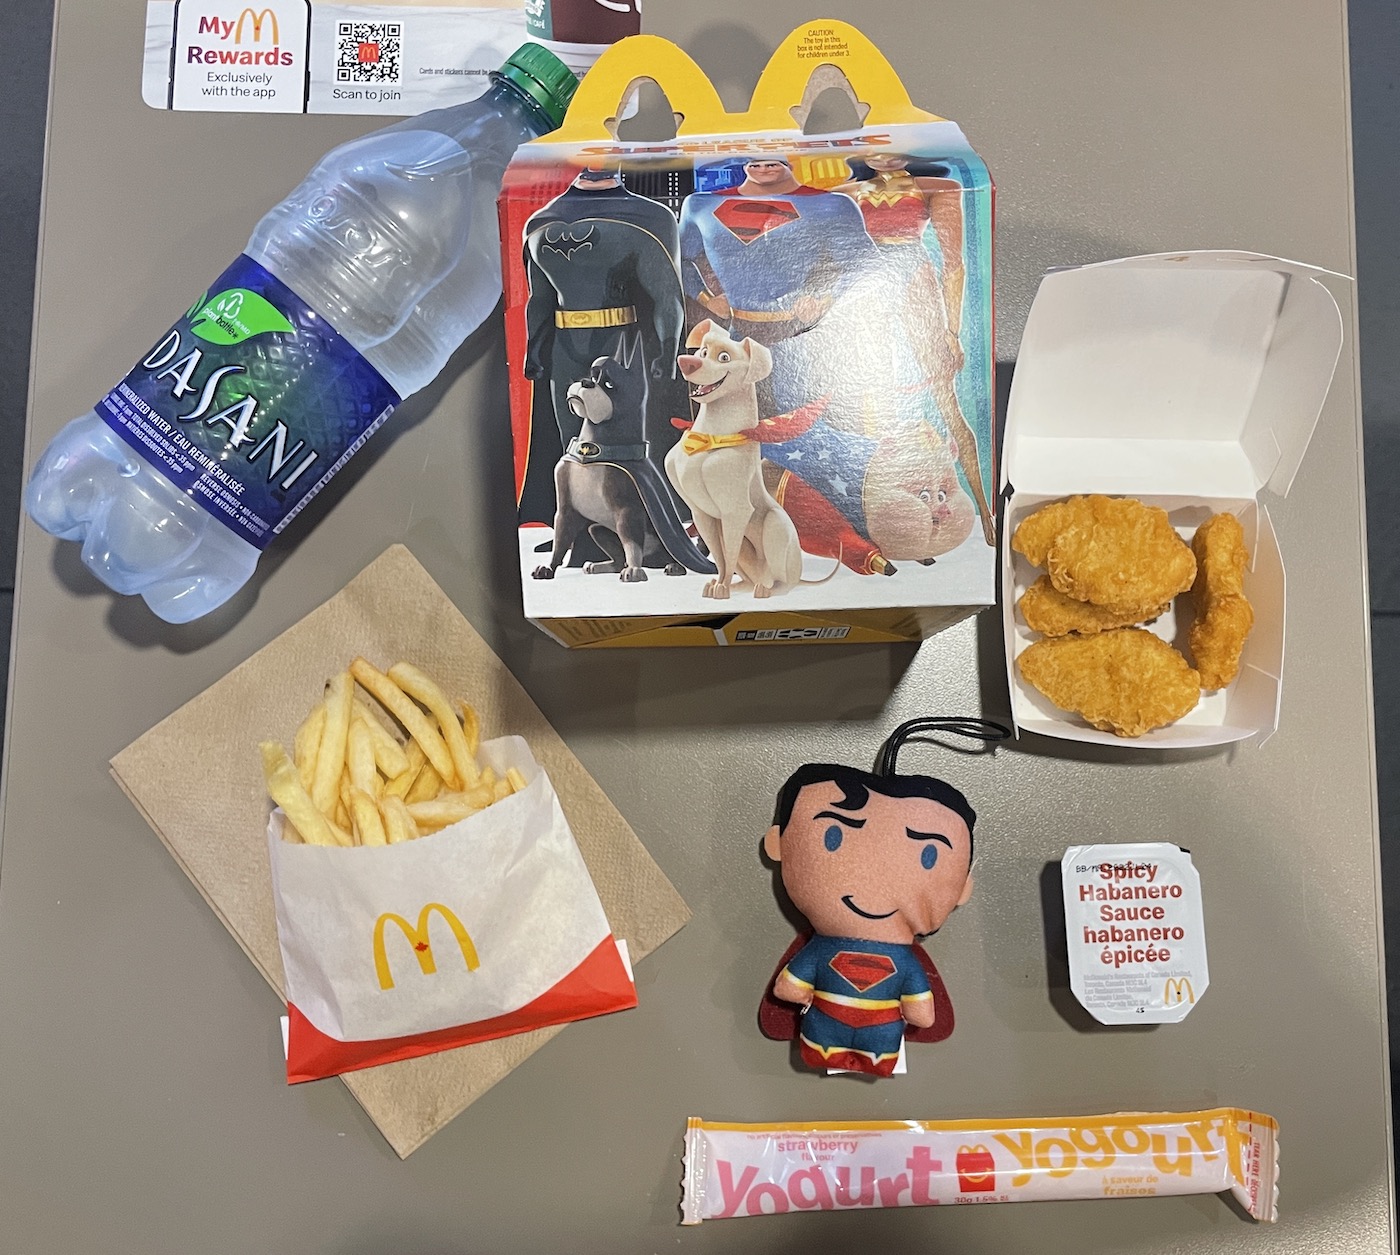 mcdonalds happy meal from vancouver canada